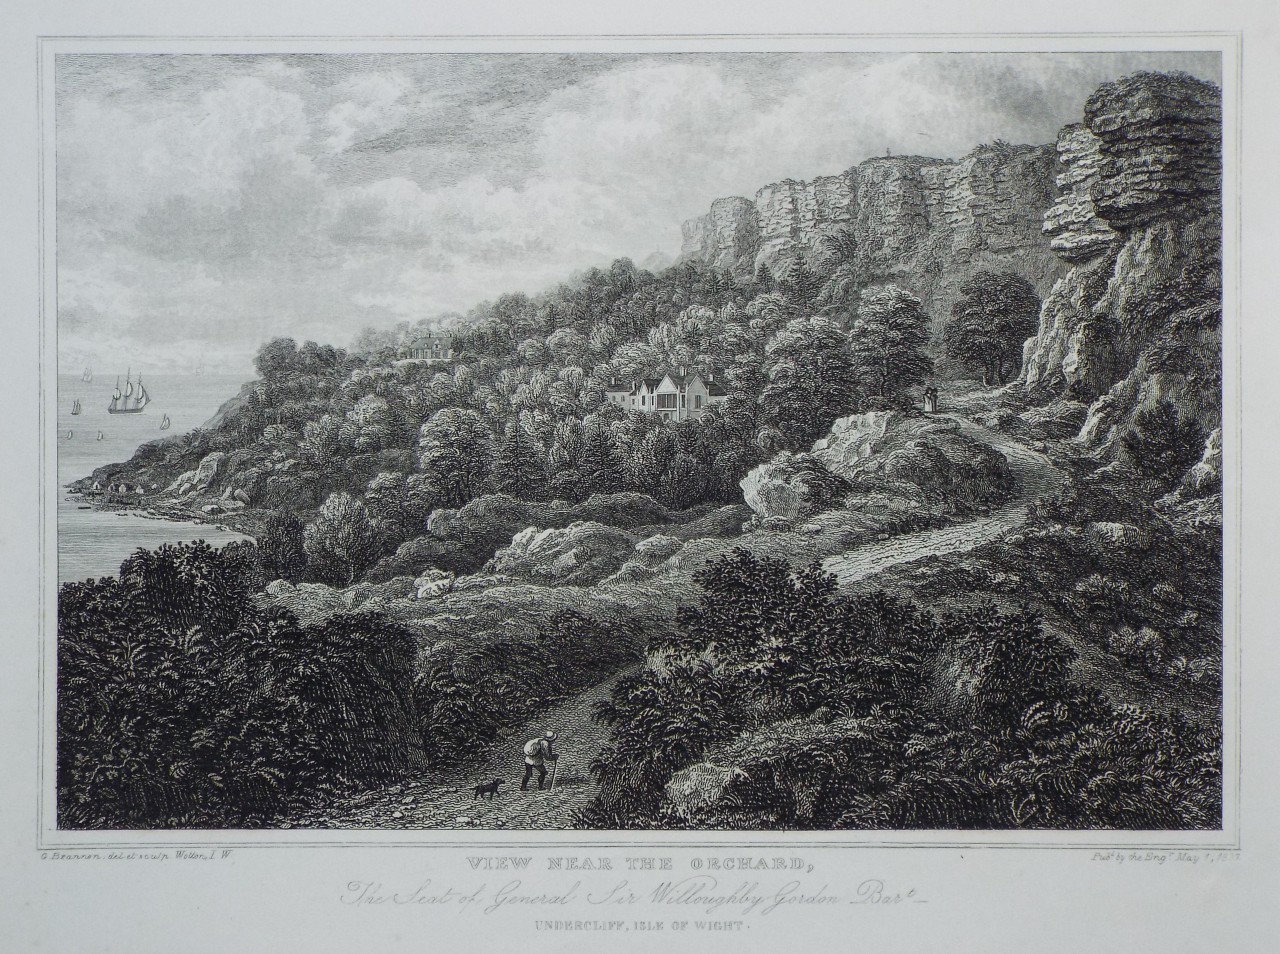 Print - View near the Orchard, The Seat of General Sir Willoughby Gordon Bart - Undercliff, Isle of Wight - Brannon